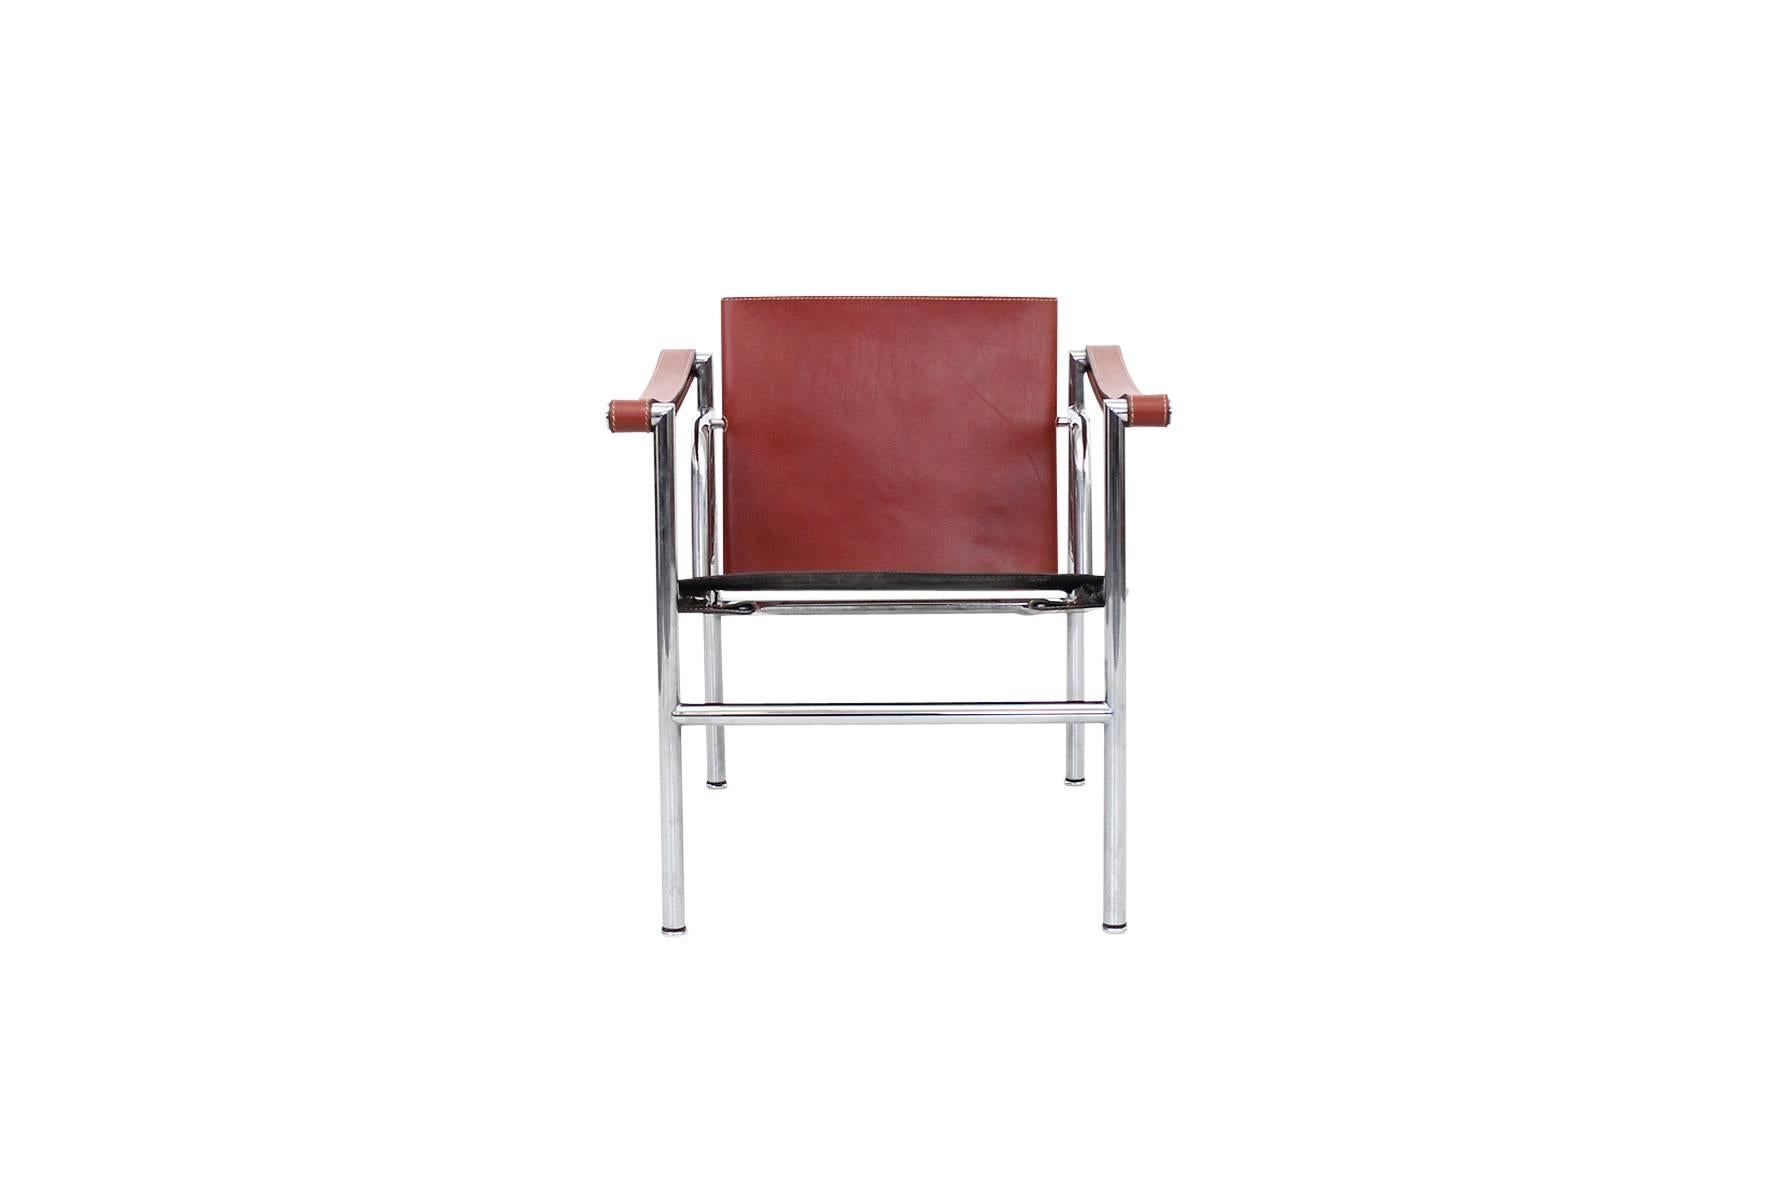 Pair of iconic lounge chairs designed by Le Corbusier and produced by Cassina. Chairs are signed and stamped. These are model LC1 and feature a rare ox blood red leather.